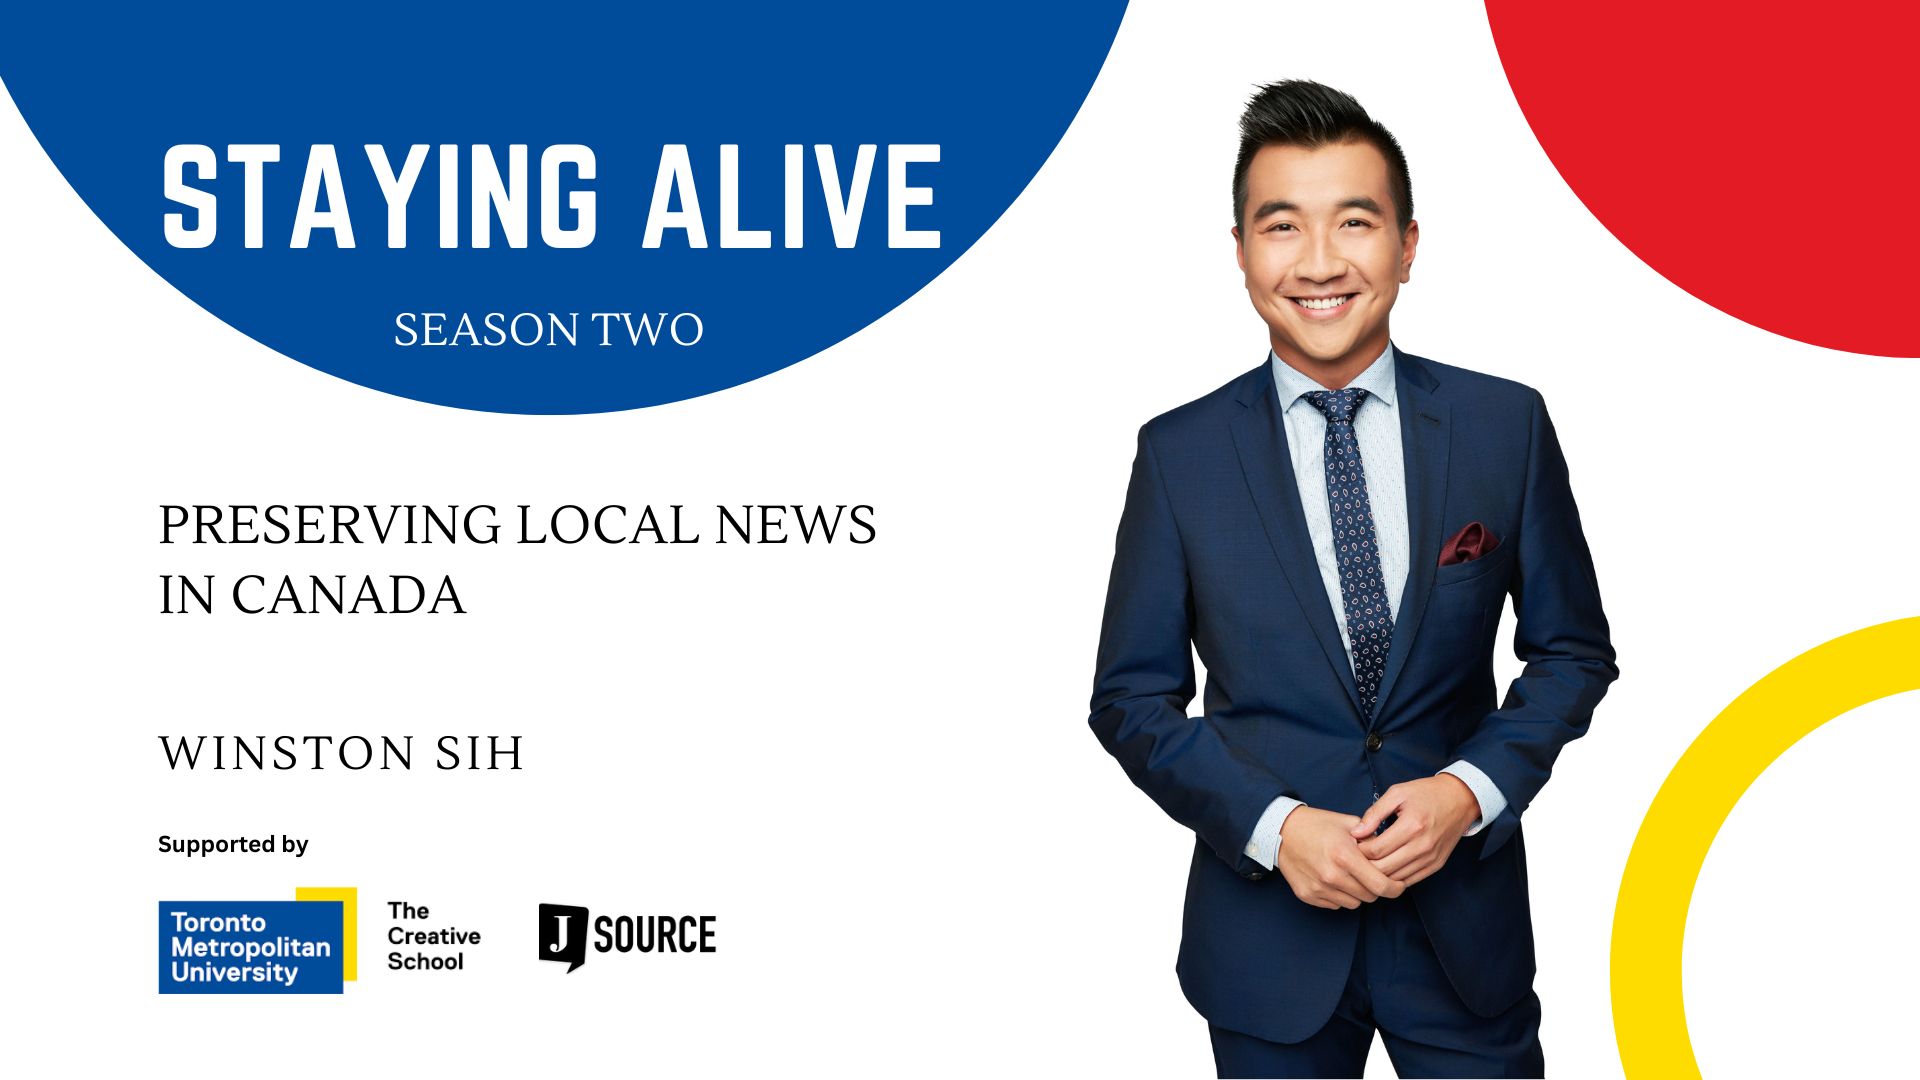 Staying Alive 
Season two
Preserving local news in Canada
Winston Sih
Supported by Toronto Metropolitan University The Creative School 
J-Source